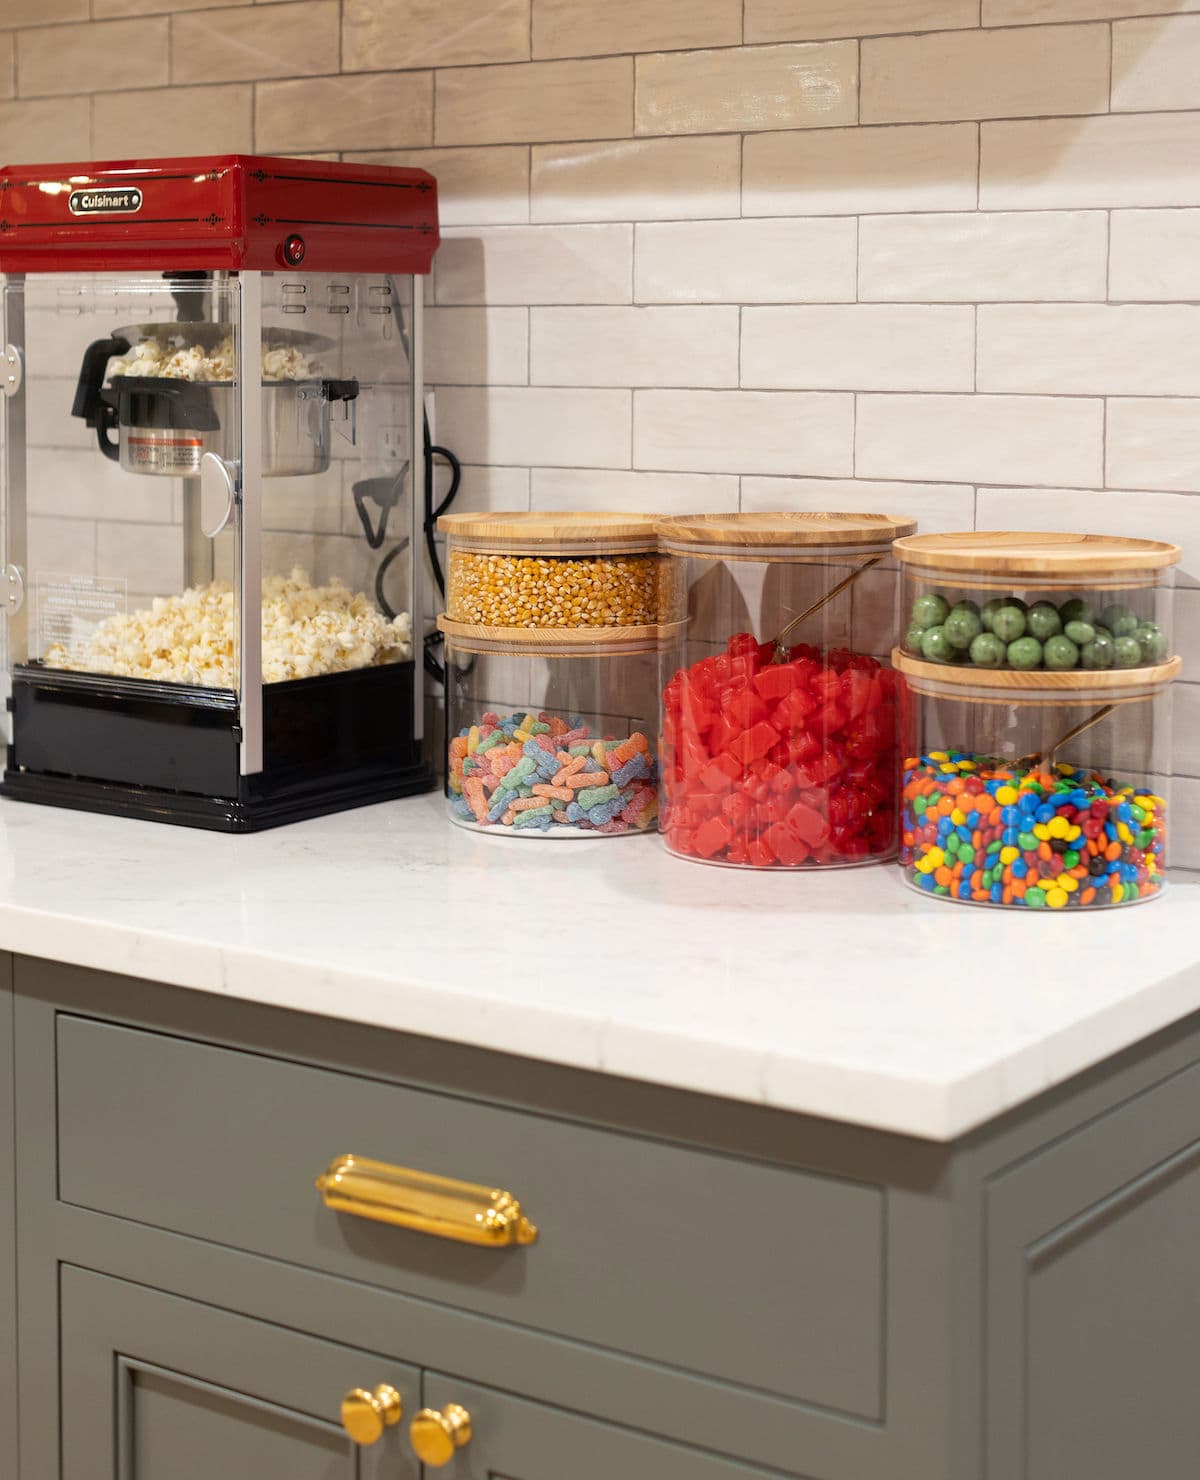 basement theater snack area with popcorn make rand candy jars. 